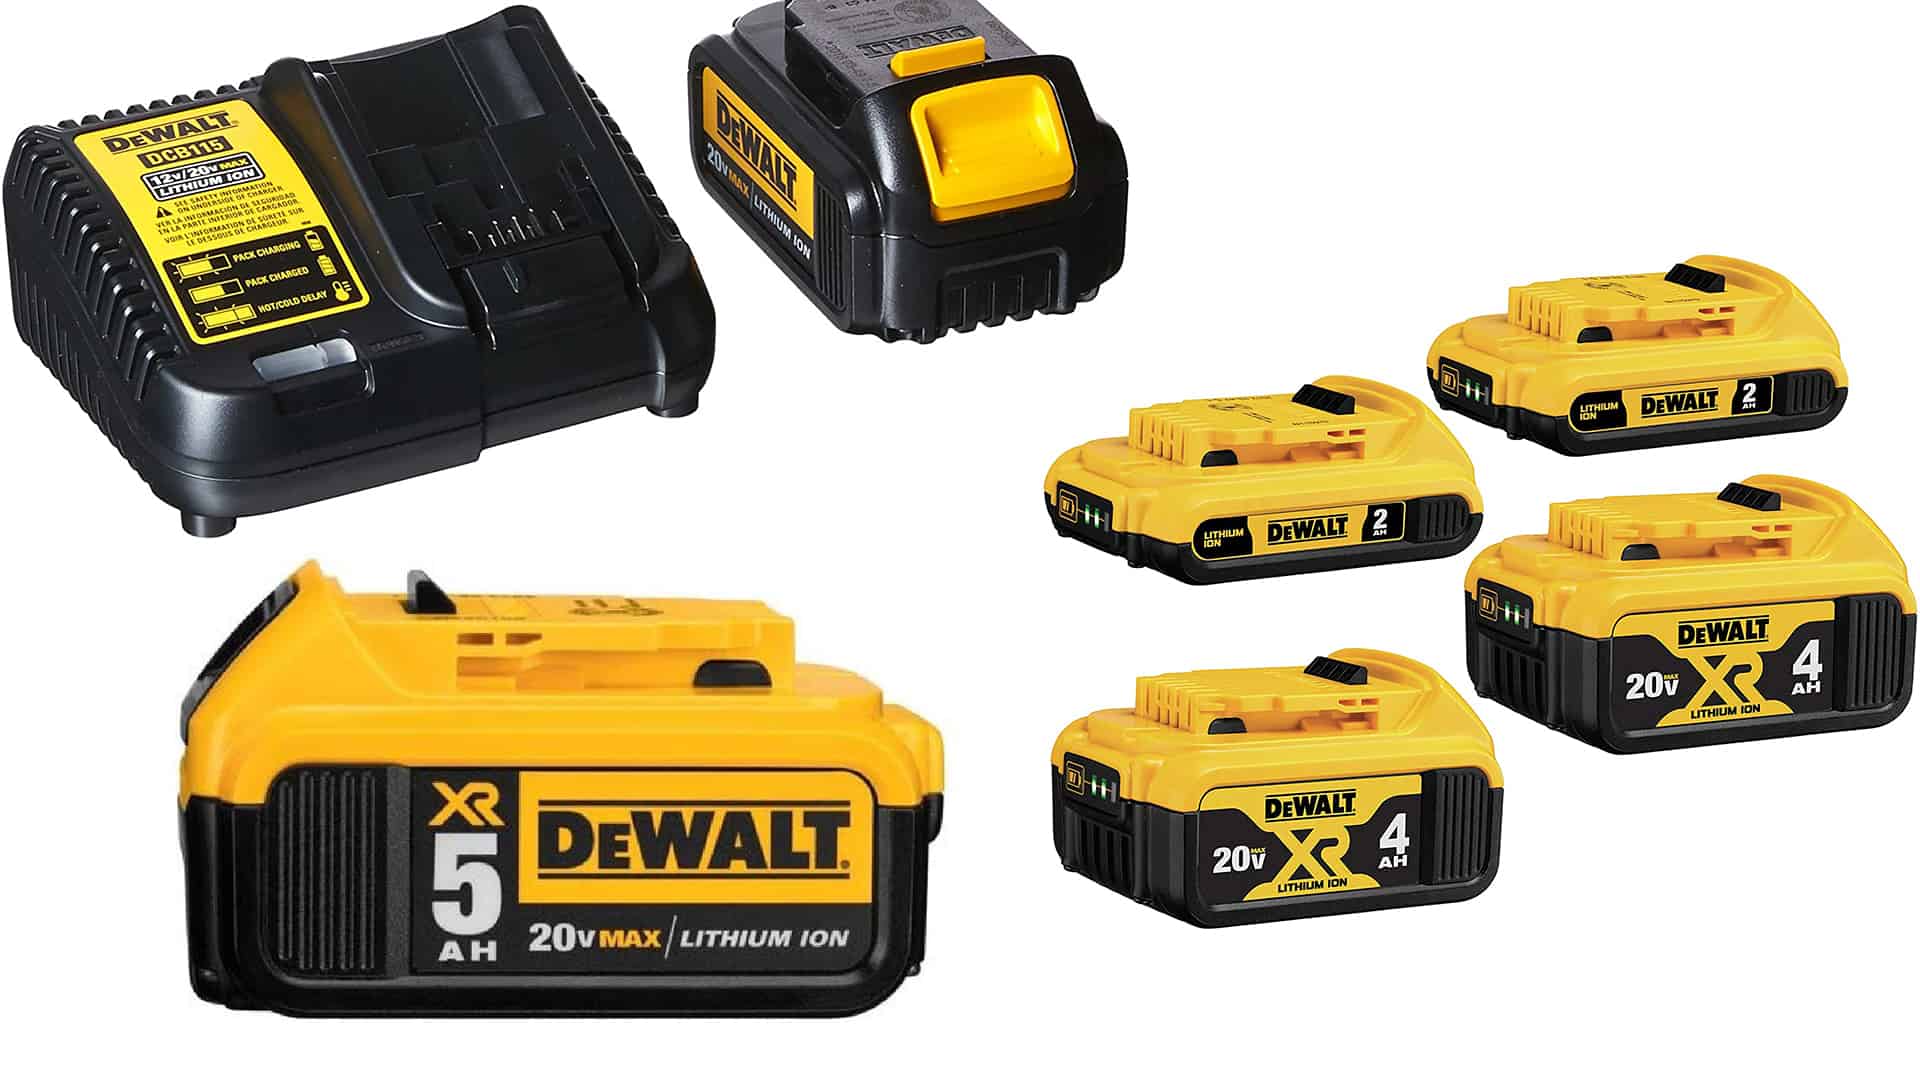 What Are the Best DeWalt Batteries - What Are the Best DeWalt Batteries? - HandyMan.Guide - DeWalt Batteries